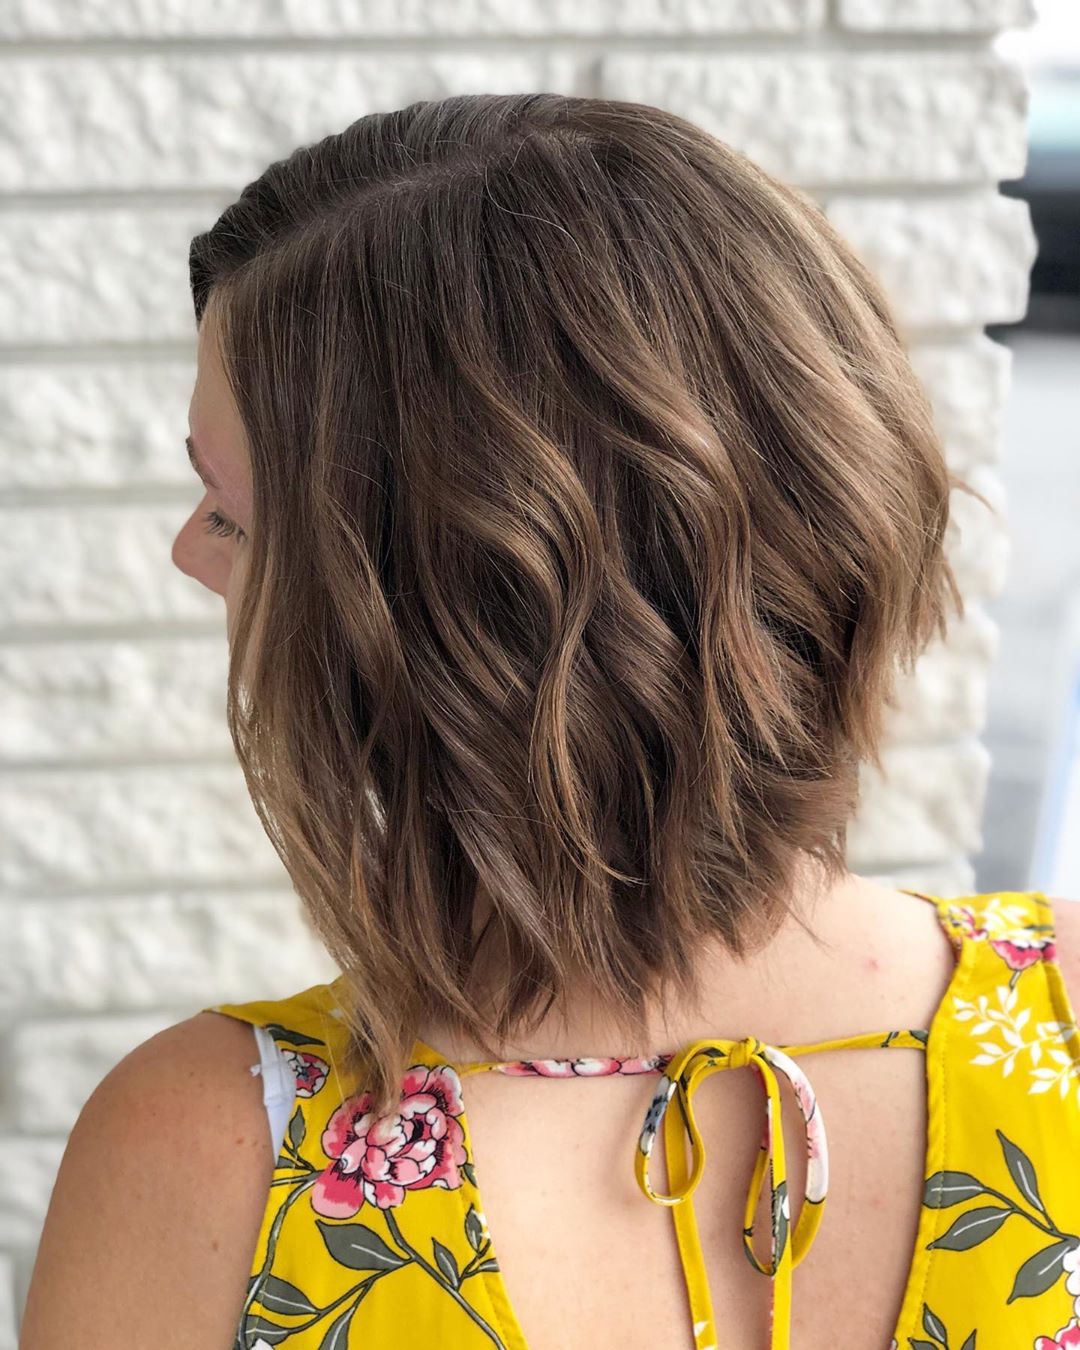 Razor Cut Bob Haircuts Are Still Trending and Here are 18 Ideas to Consider